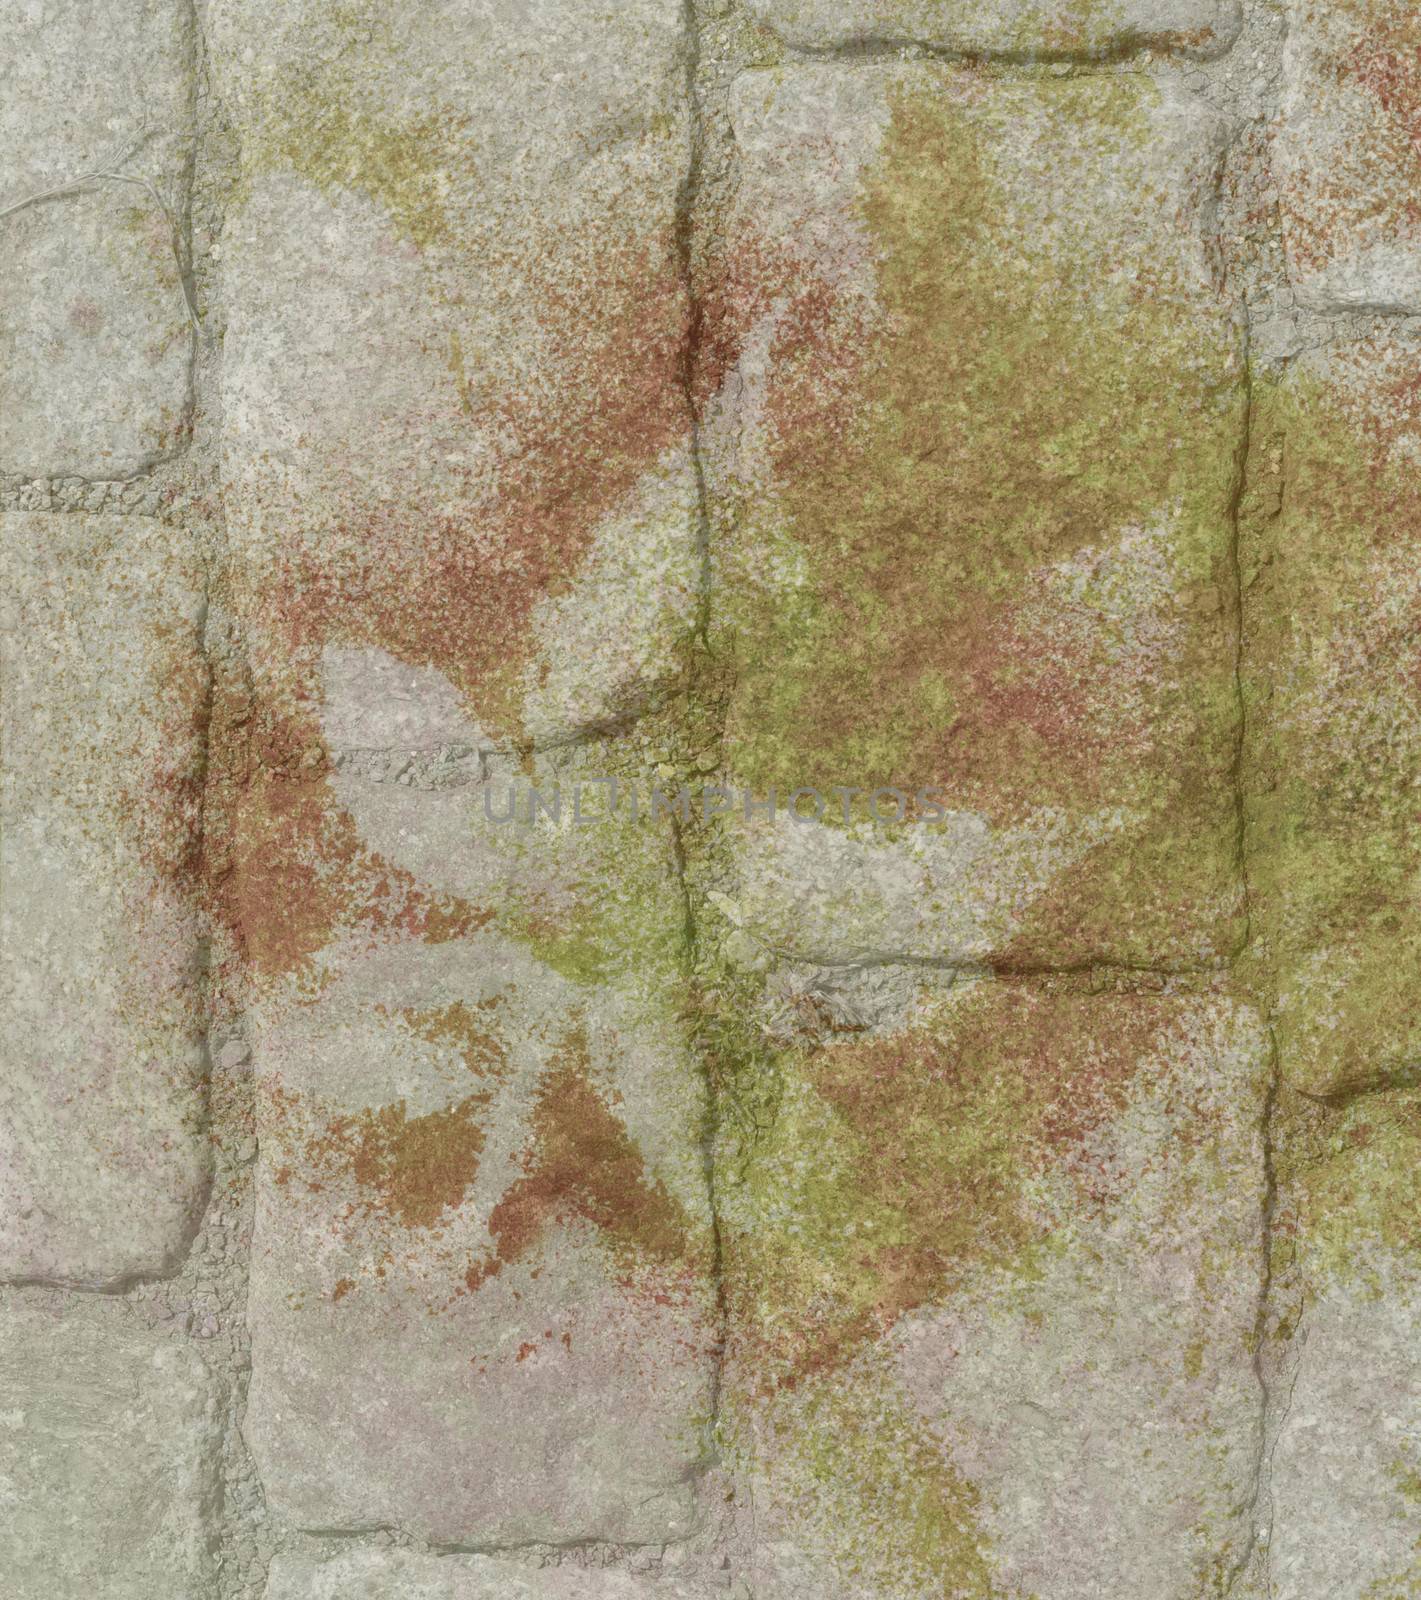 Stone and painted leaves by alexcoolok